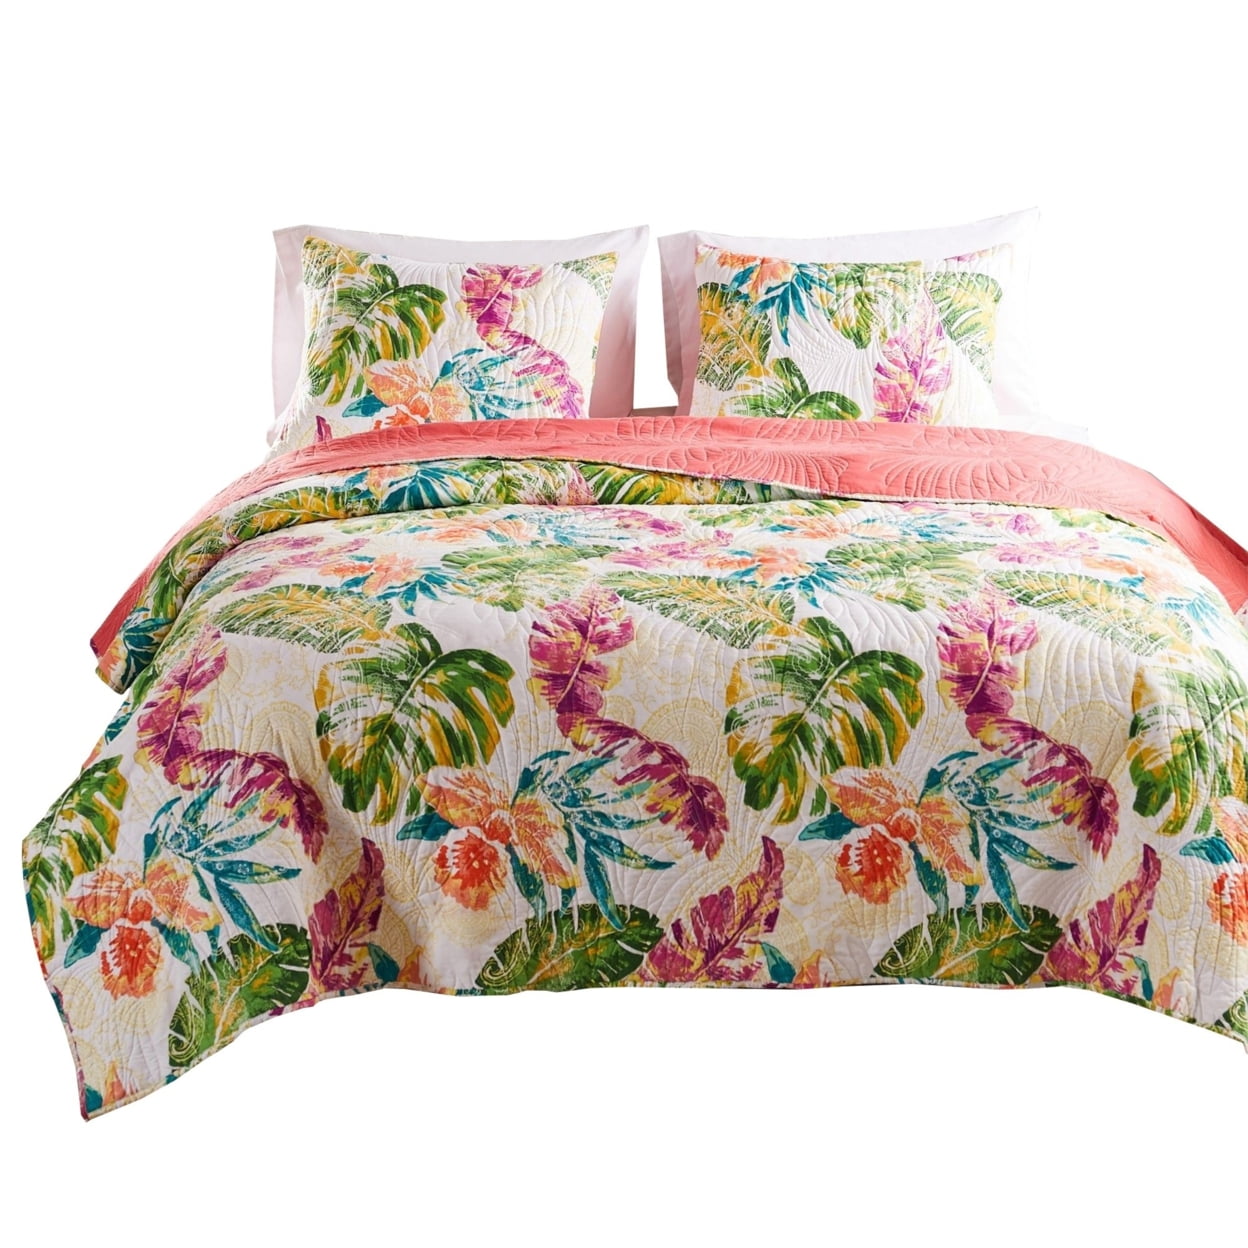 Picture of Benjara BM251007 3 Piece Aulne Full Size Quilt Set with Leaf Print, Multicolor